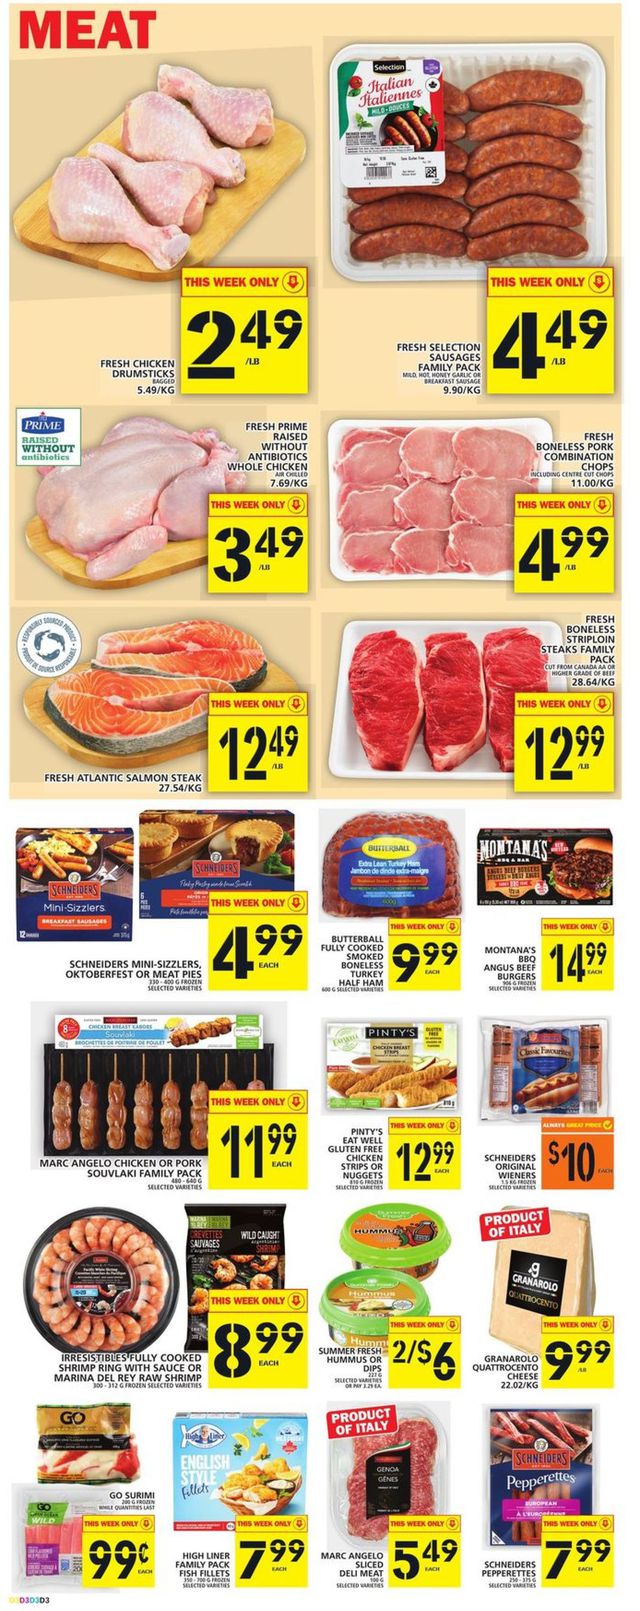 Food Basics Flyer from 07/28/2022